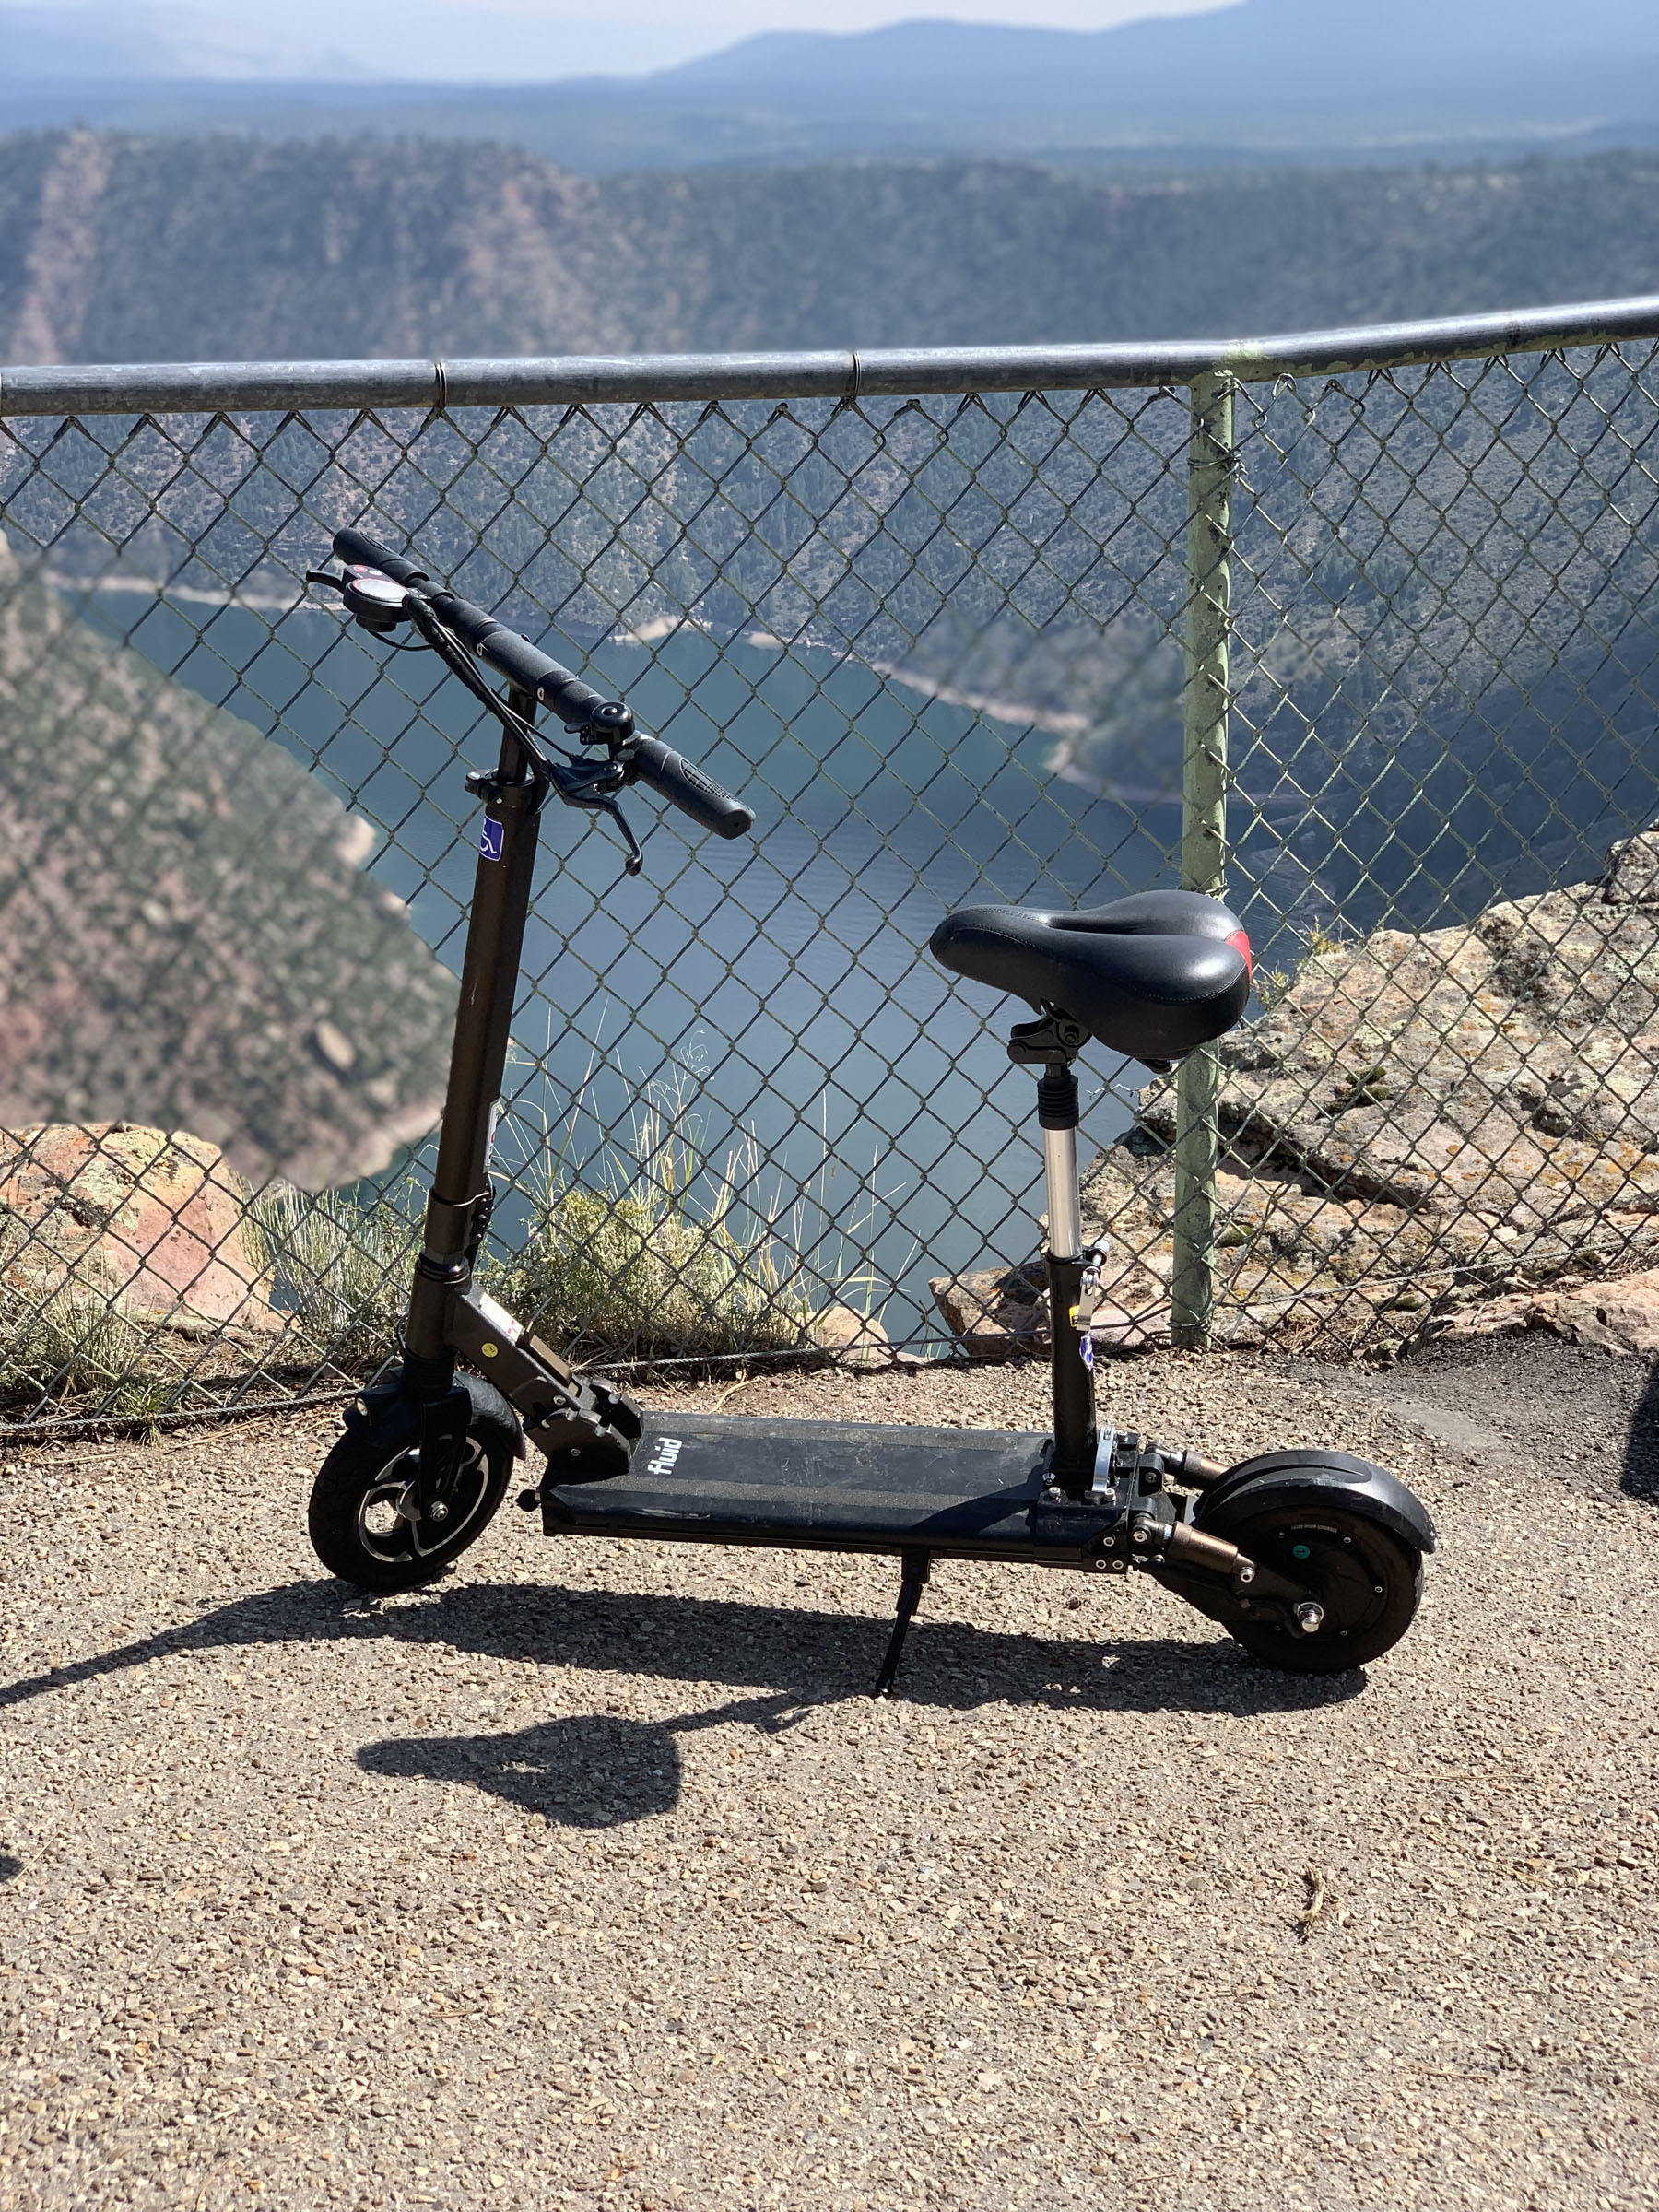 Fluid Horizon: The Mobility Scooter I've Been Looking For – Mobility